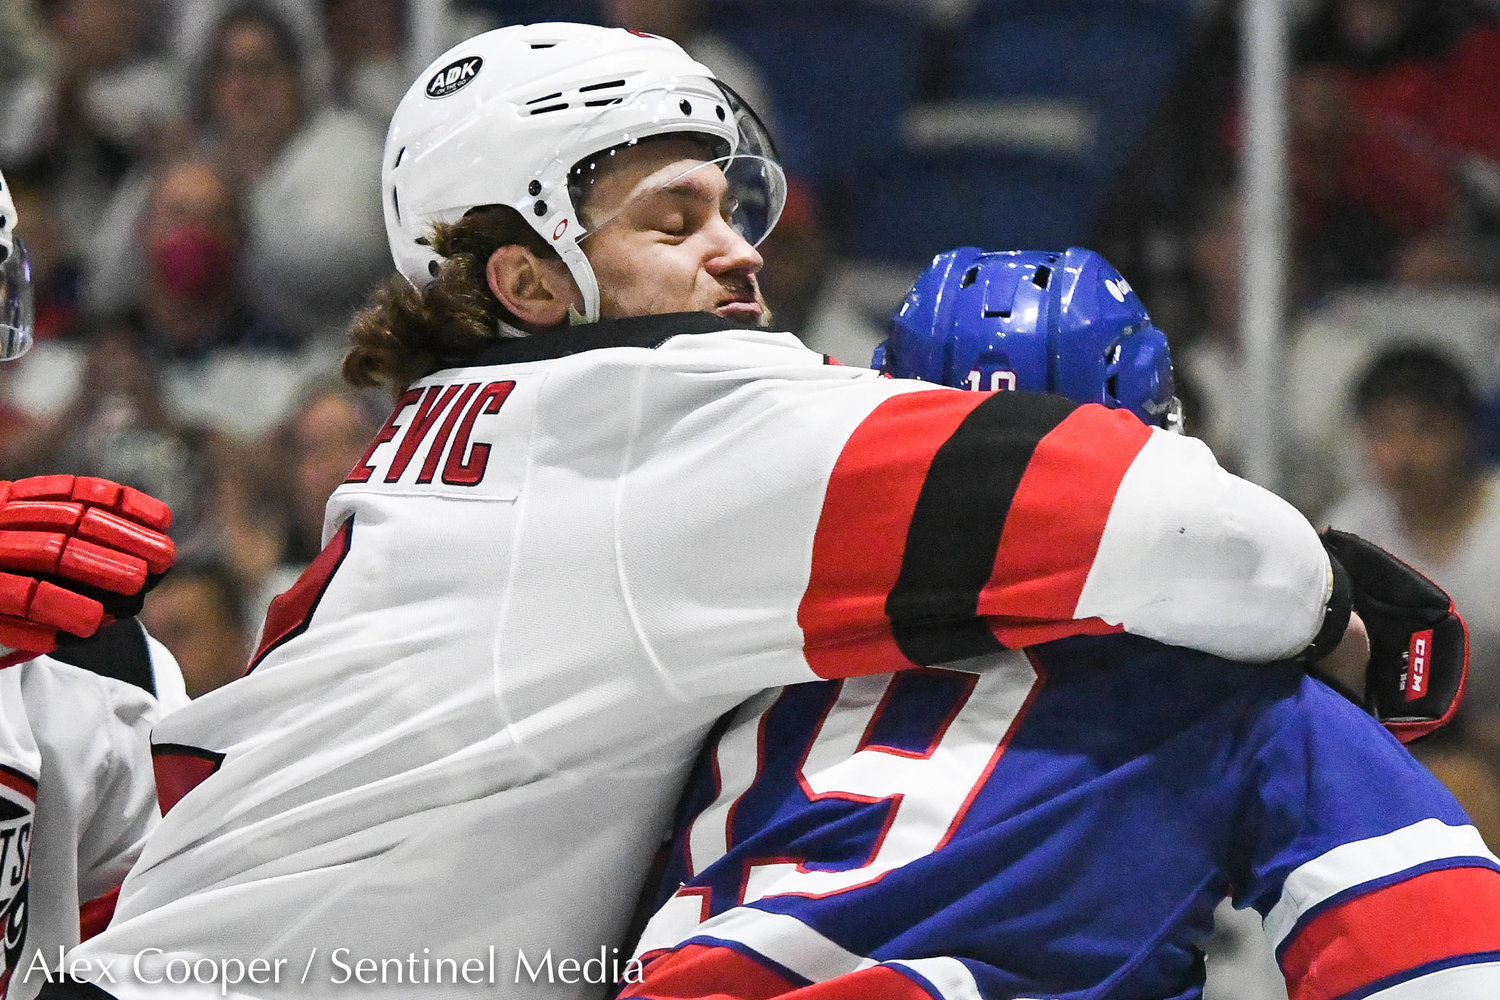 Comets player Michael Vukojevic fights Rochester's Peyton Krebs during the playoff game on Saturday.